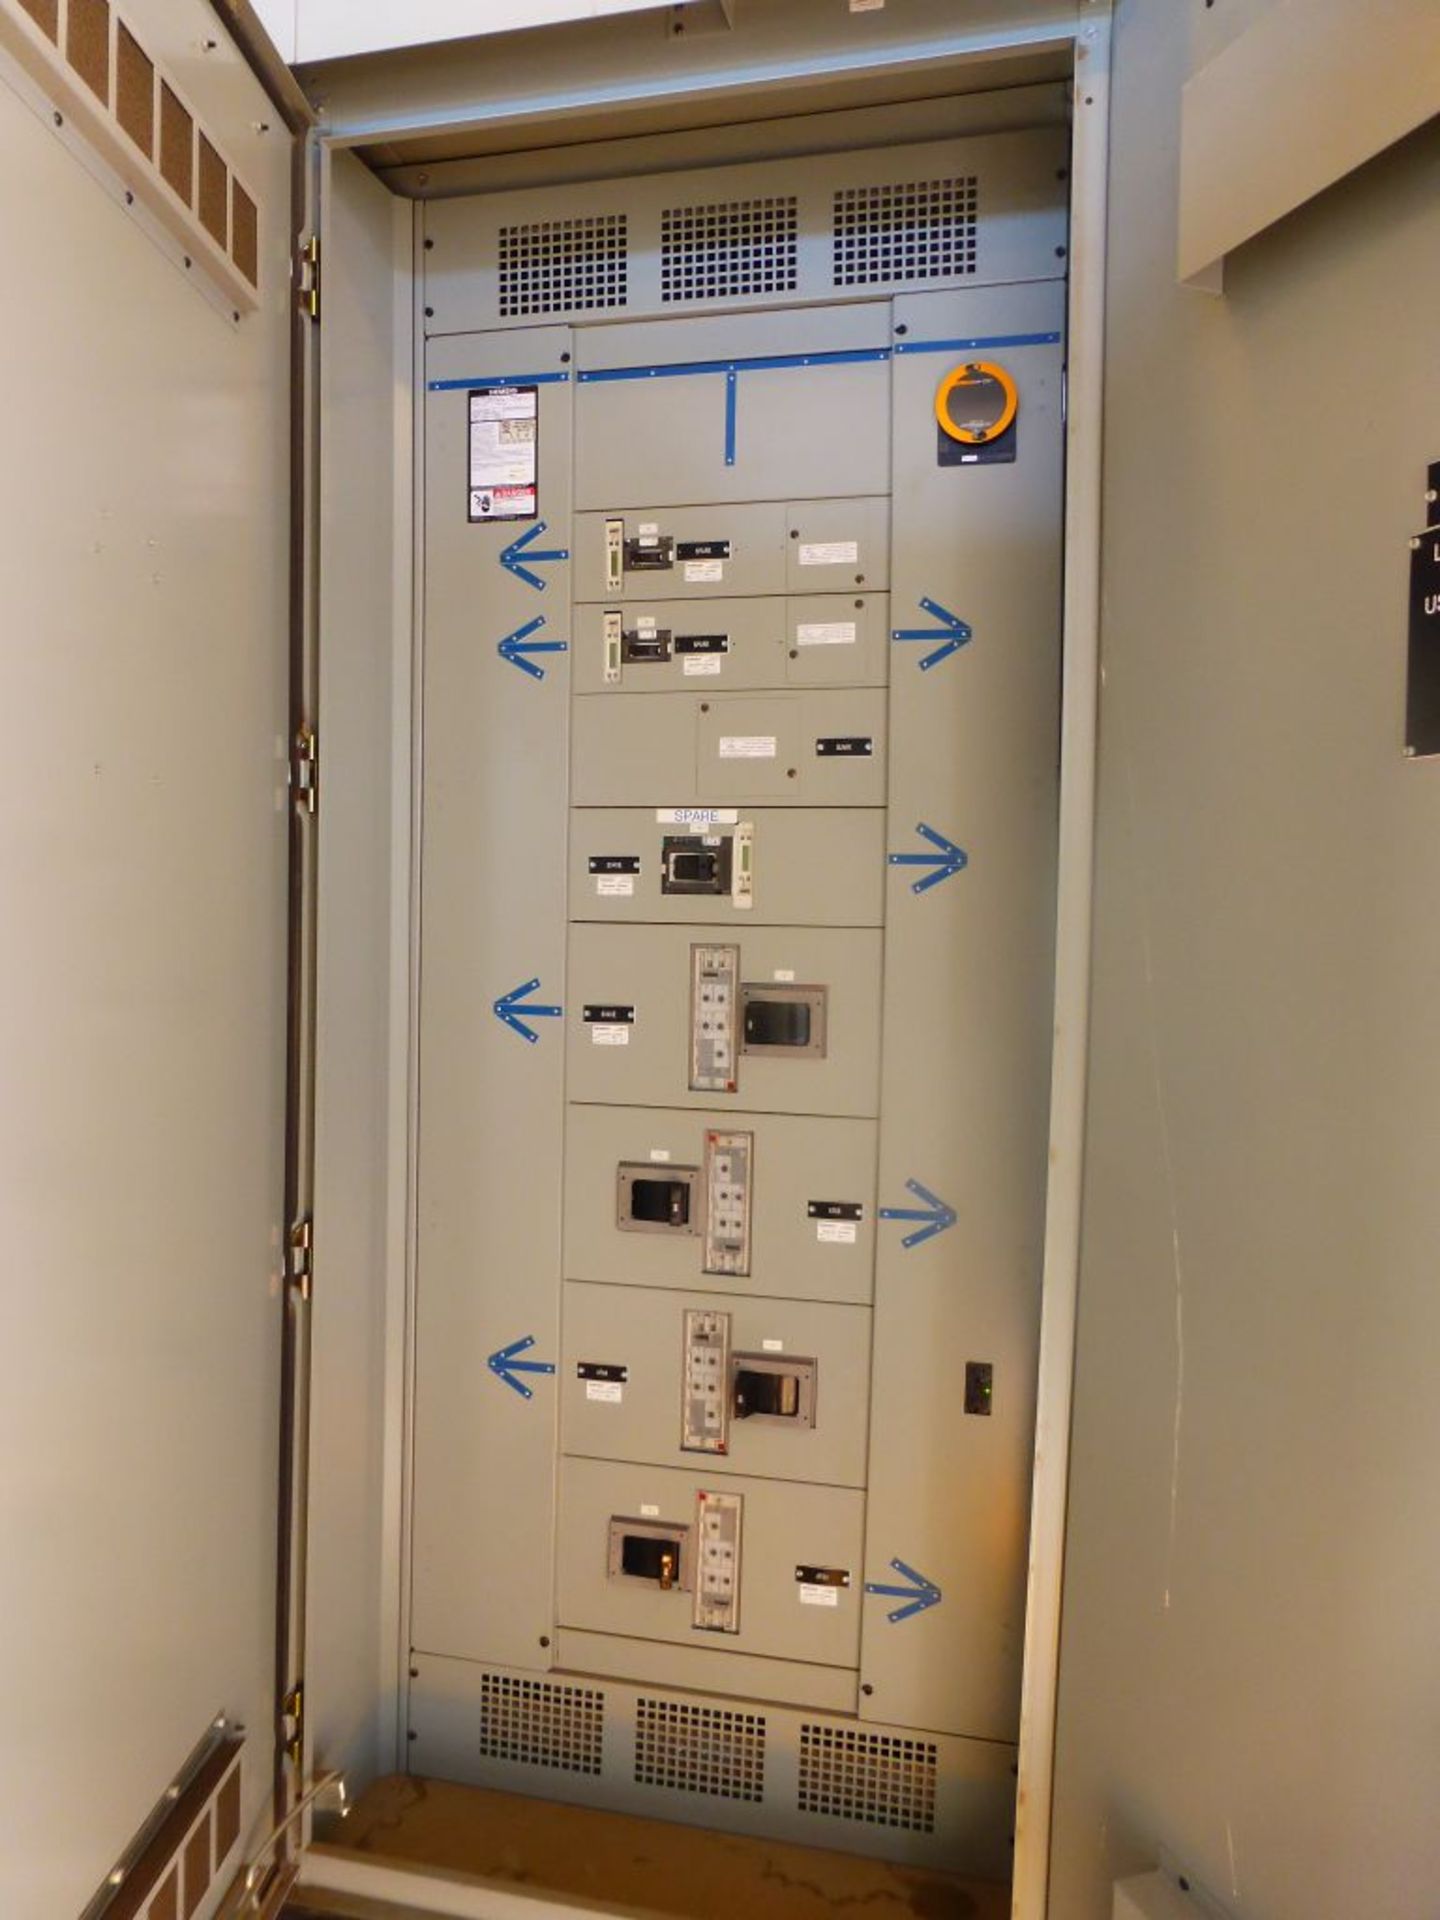 Siemens Switchgear - 4000A Breaker Suitable for Service Entrance | Lot Loading Fee: $500 | Main - Image 25 of 42